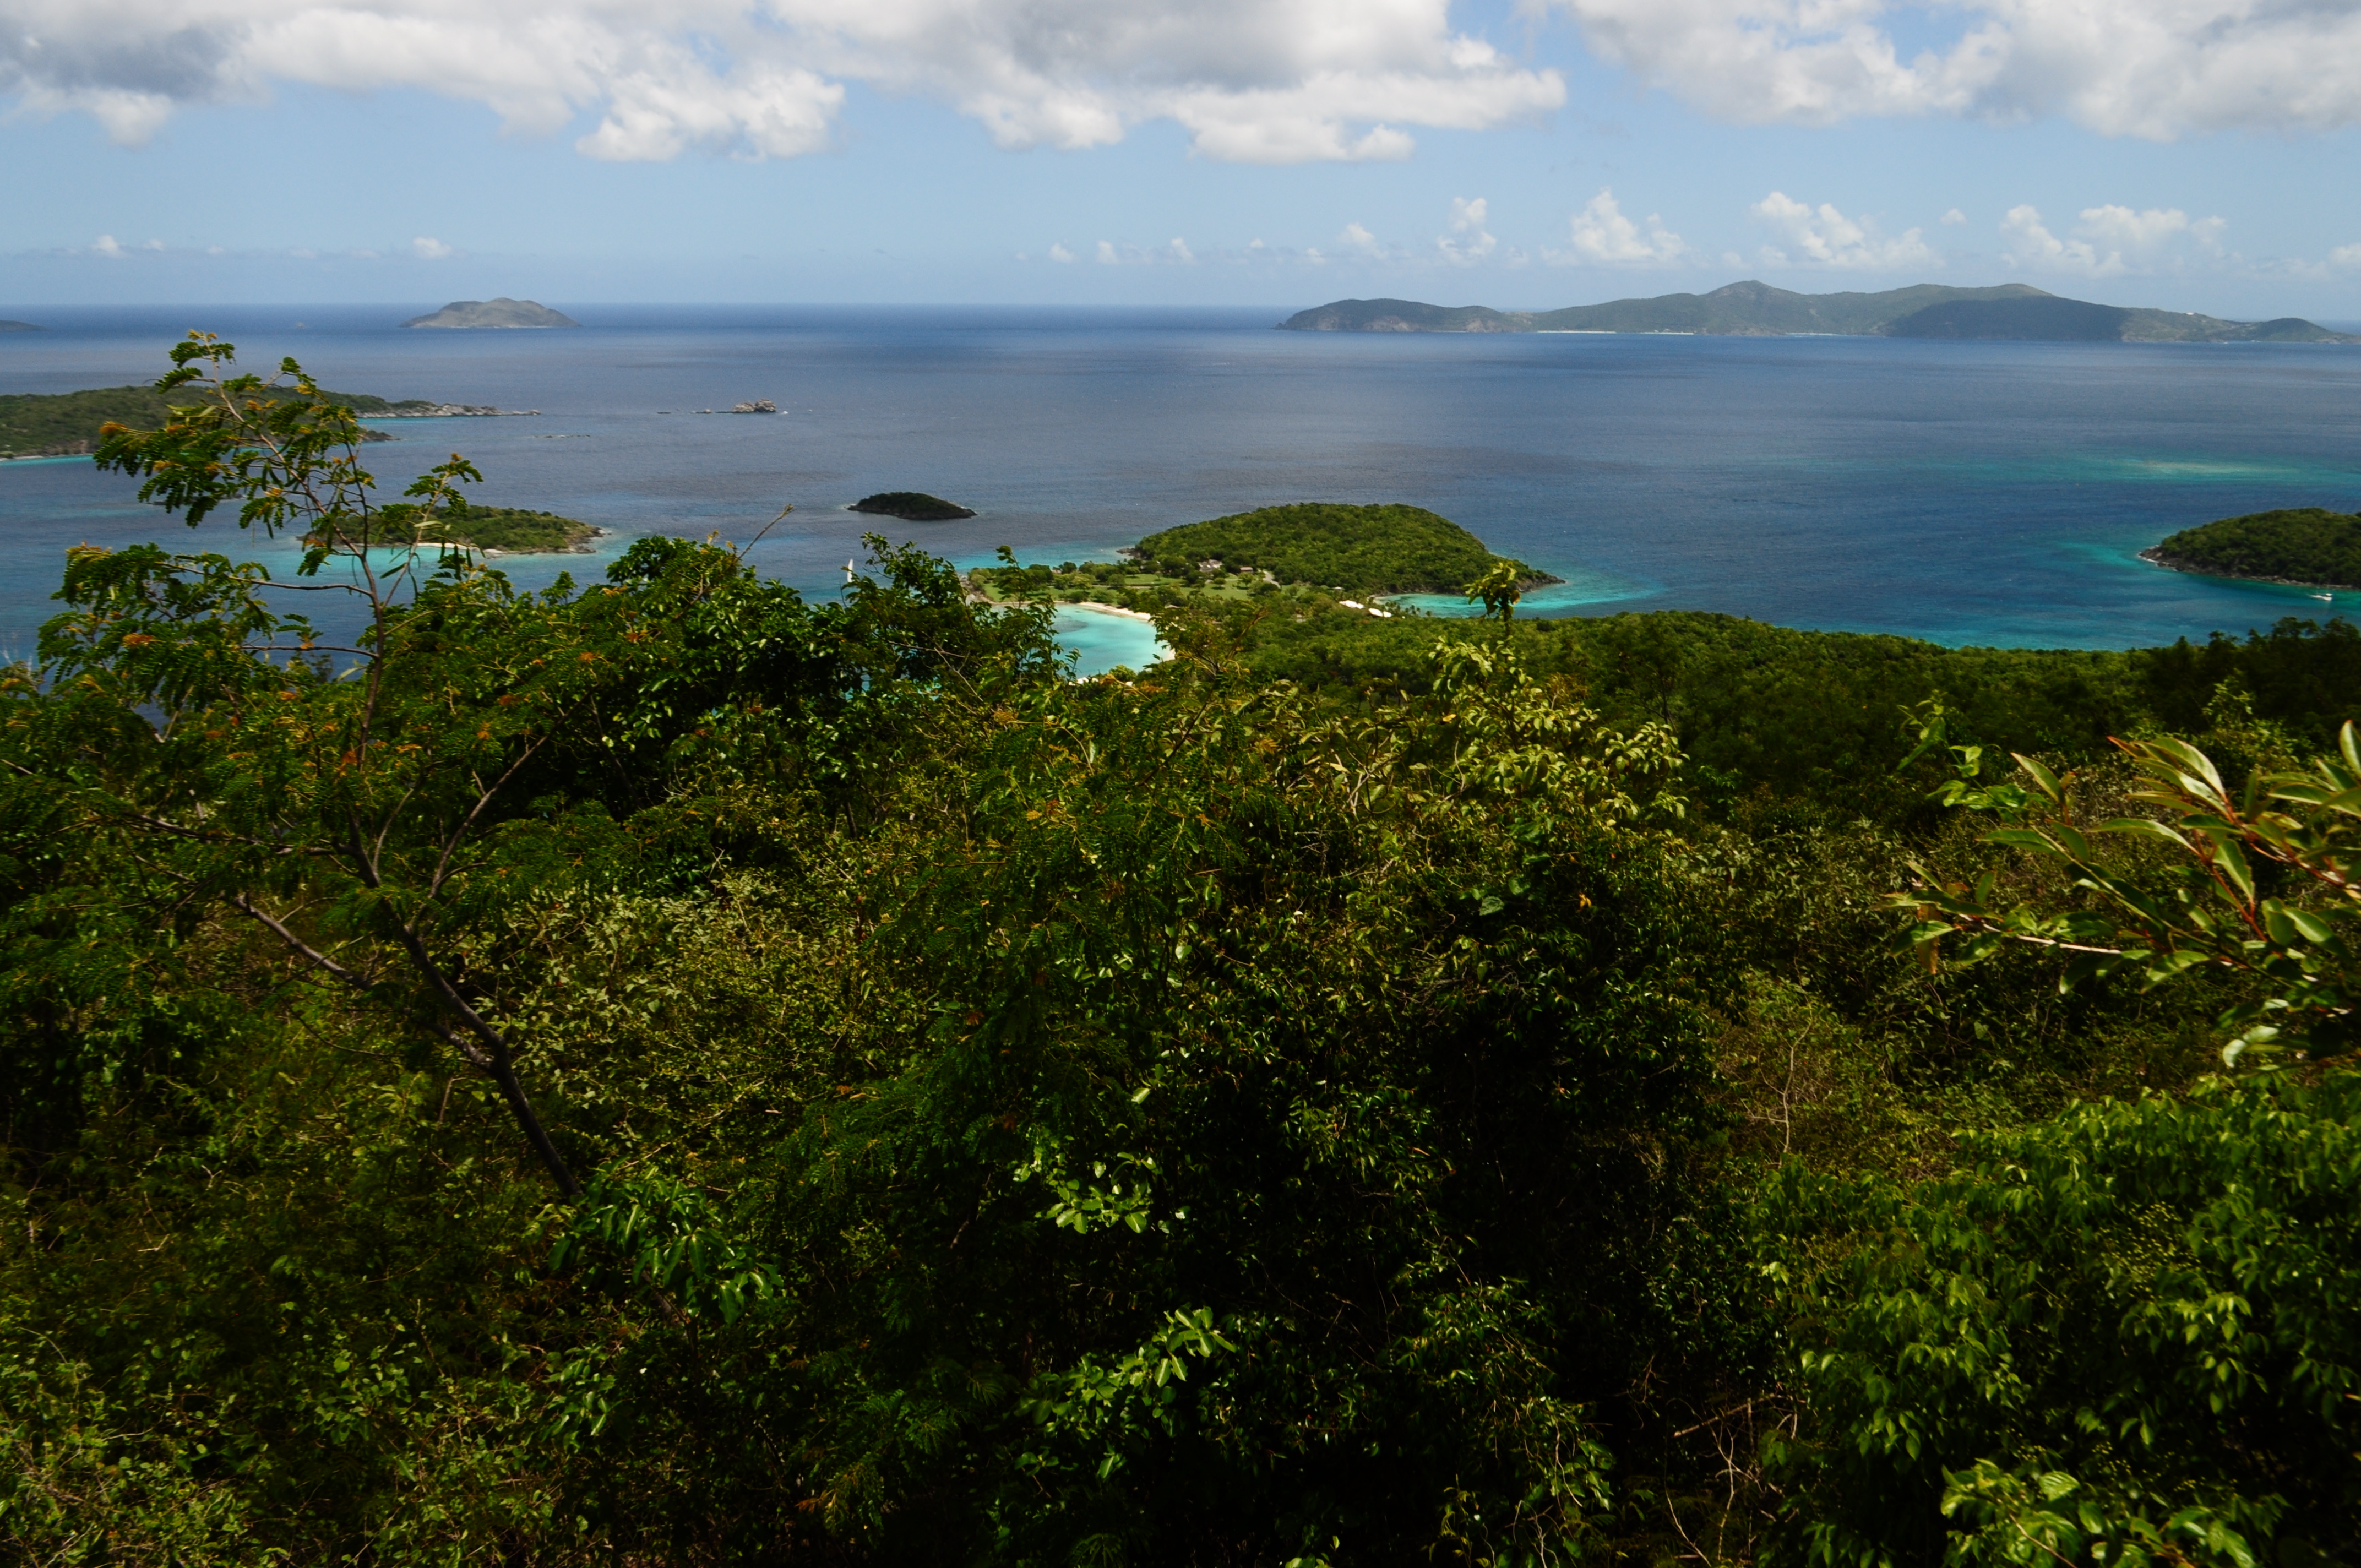 The green forested hillsides of Turtle Point cut into the blue waters of Virgin Islands National Park underneath a partly cloudy sky.